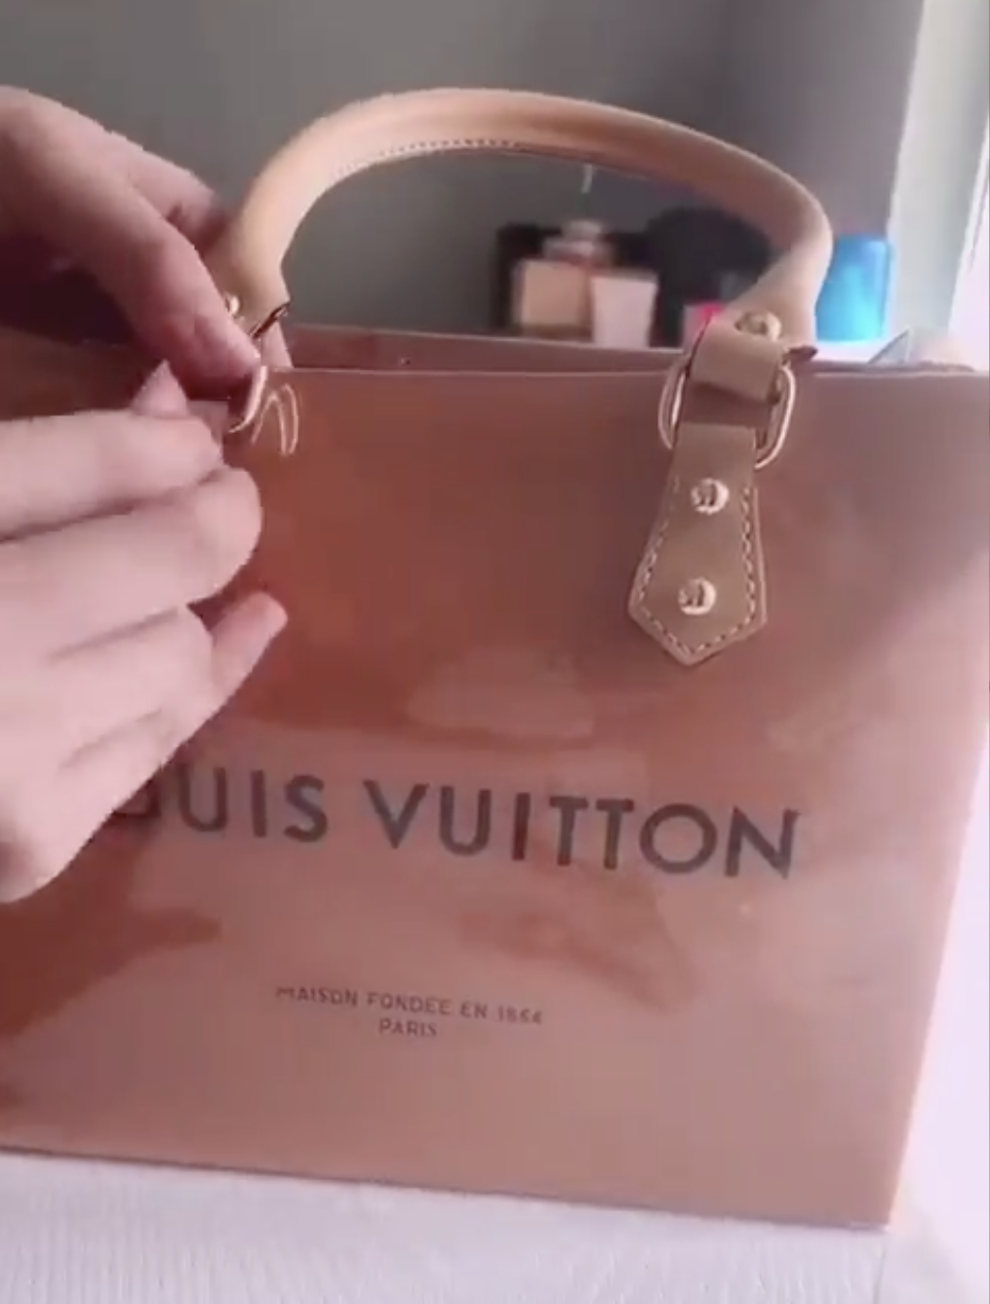 How I turned my Louis Vuitton shopping bag into a bag to carry